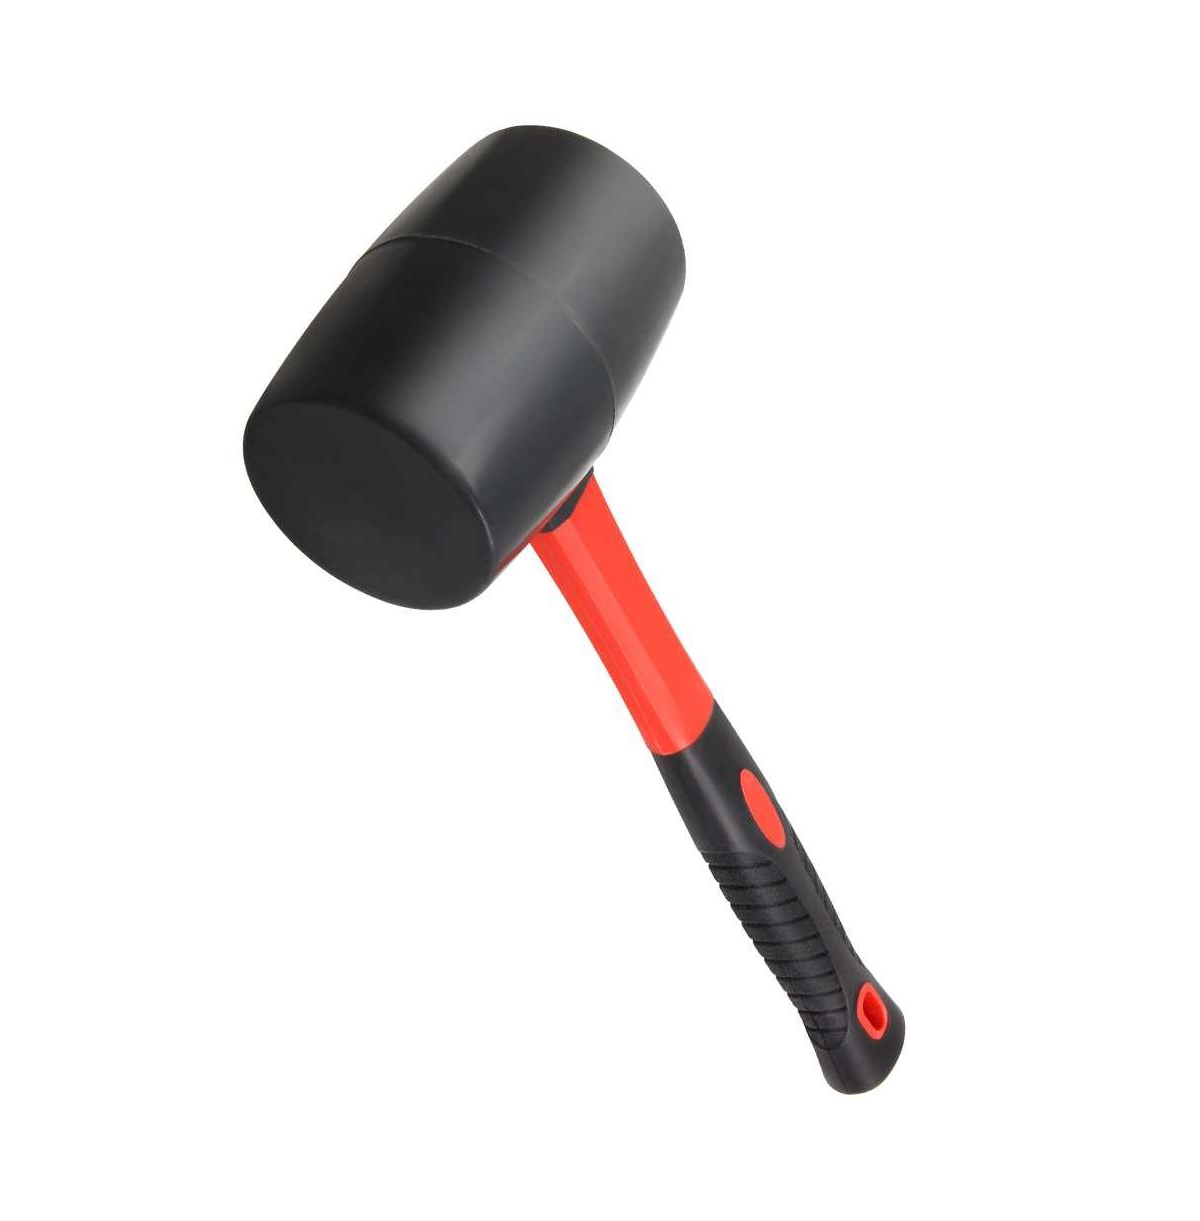 32 Ounce Rubber Mallet with Fiberglass Handle - Red